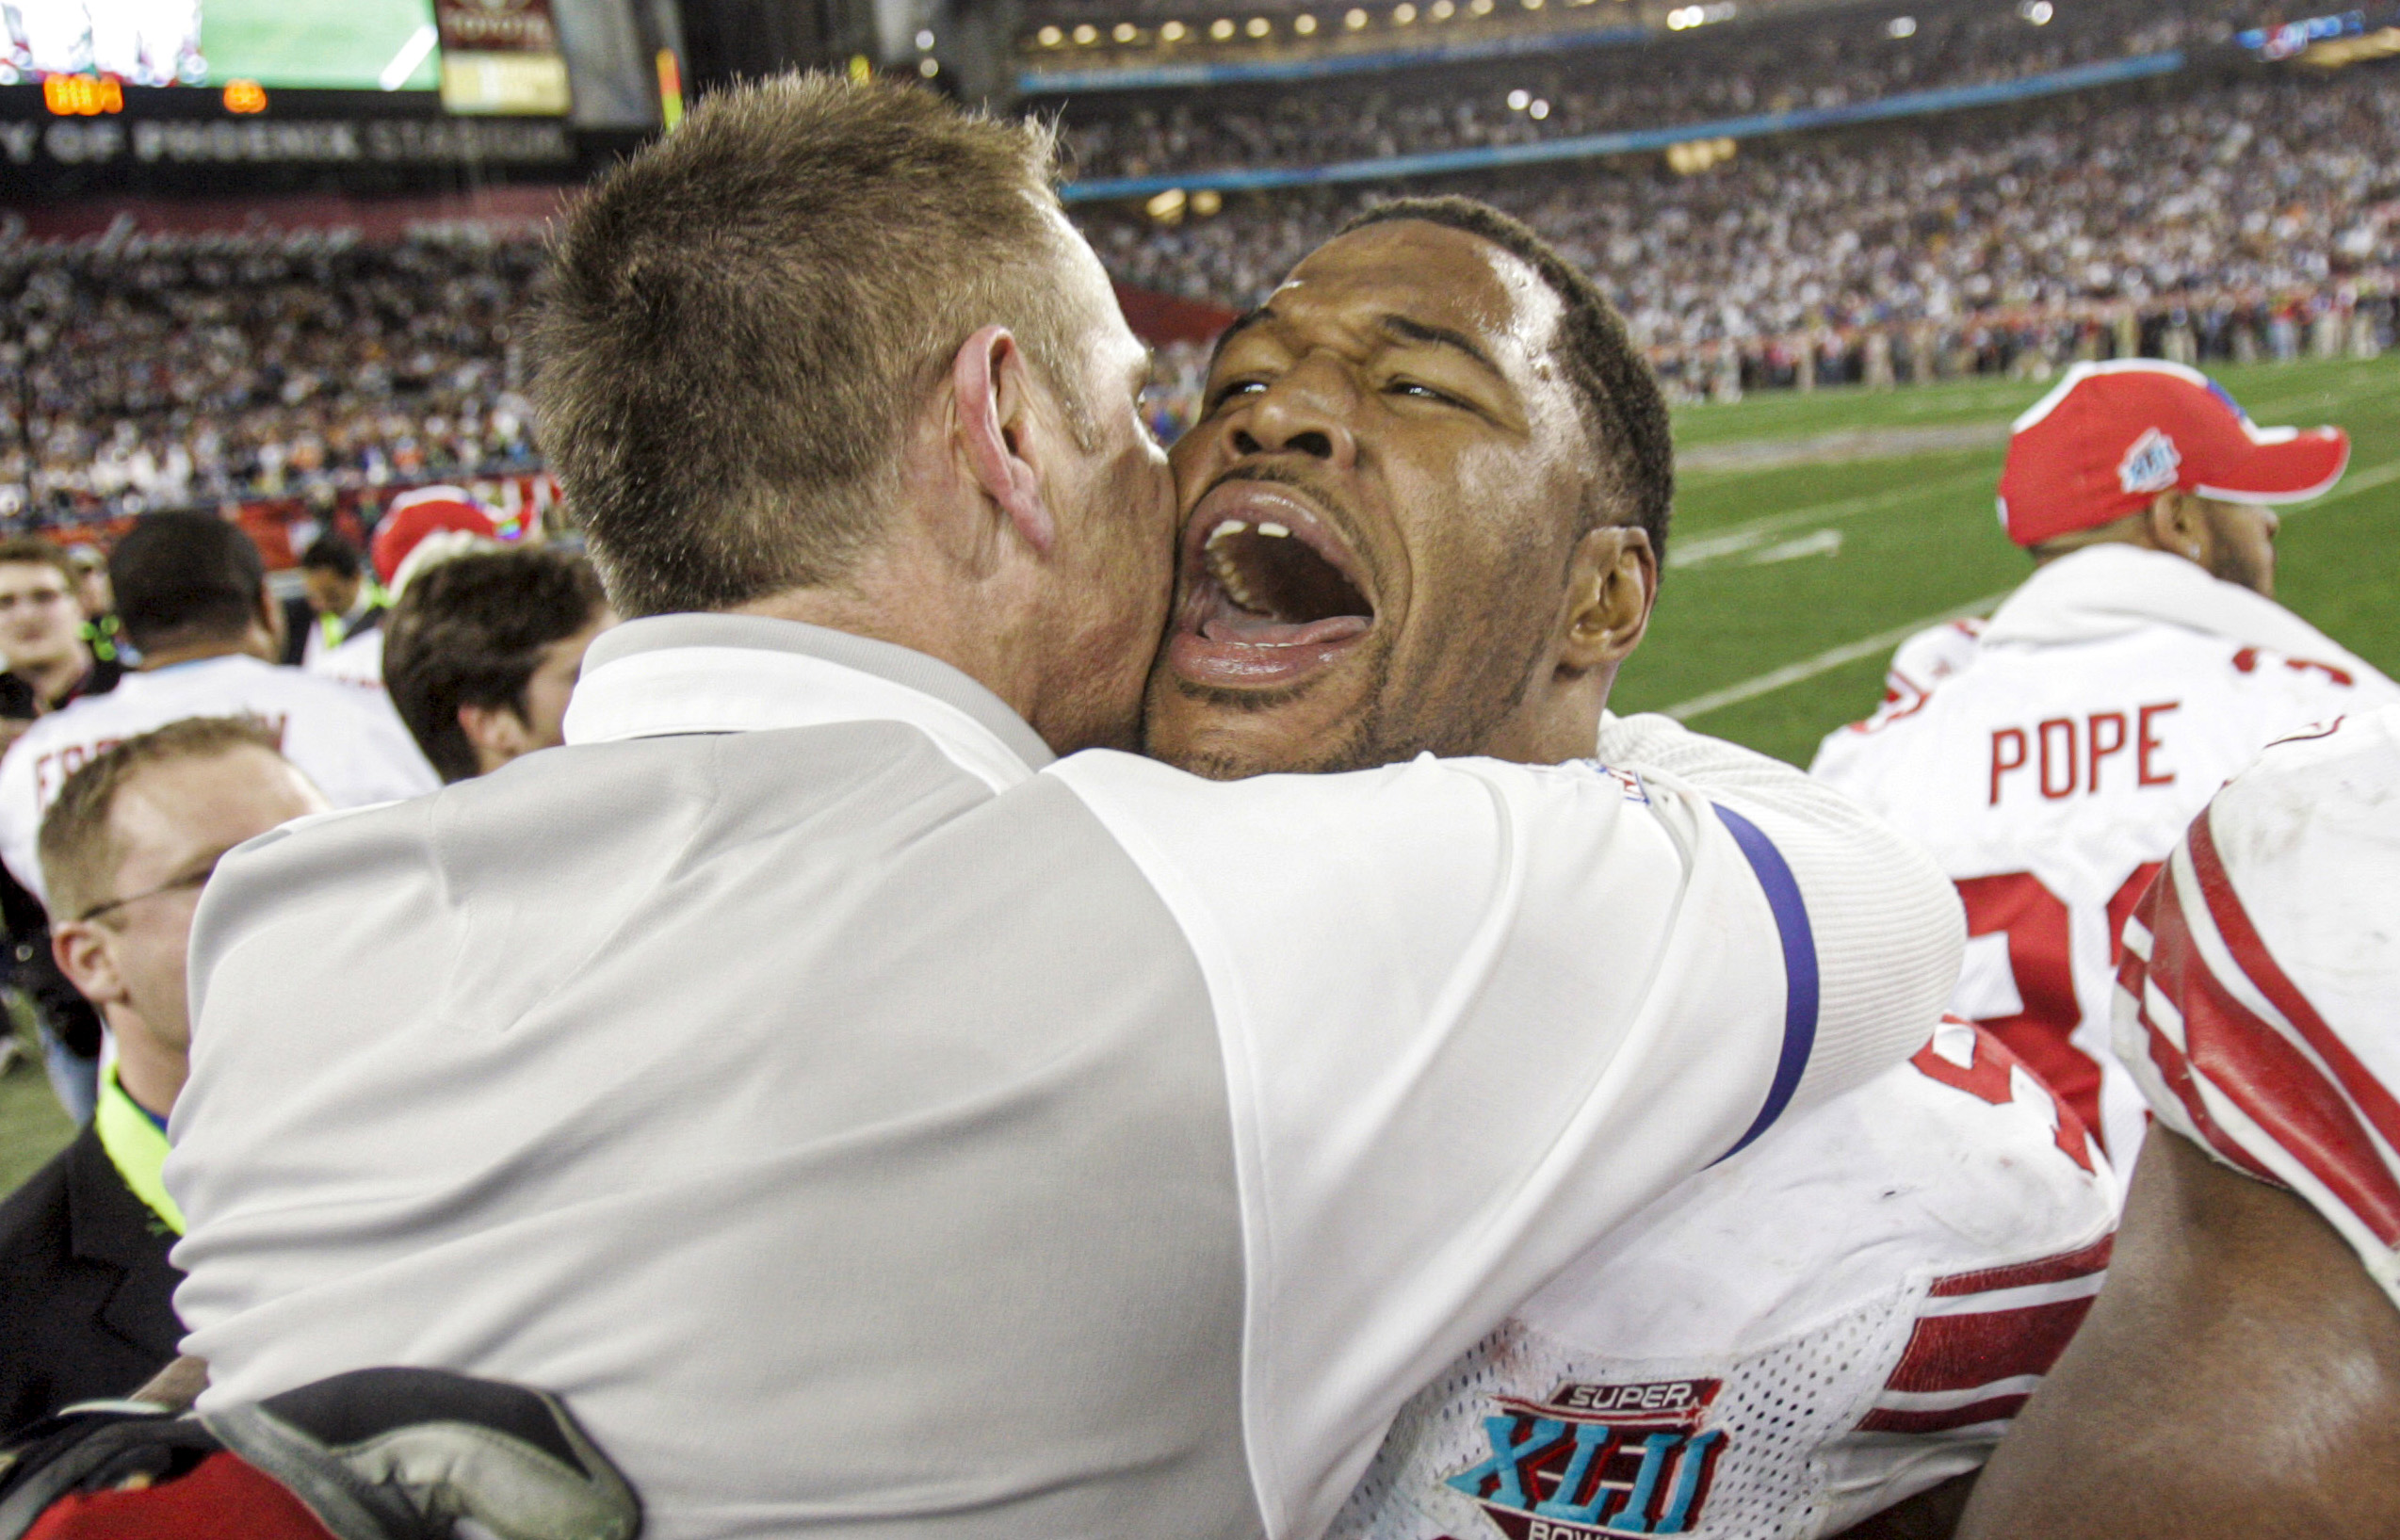 Giants DE Michael Strahan embraces defensive coordinator Steve Spagnuolo after  the New York Giants defeat the New England Patriots at University of Phoenix Stadium in Super Bowl XLII.  GLENDALE, AZ  (2008 file photo by Andrew Mills | The Star-Ledger)